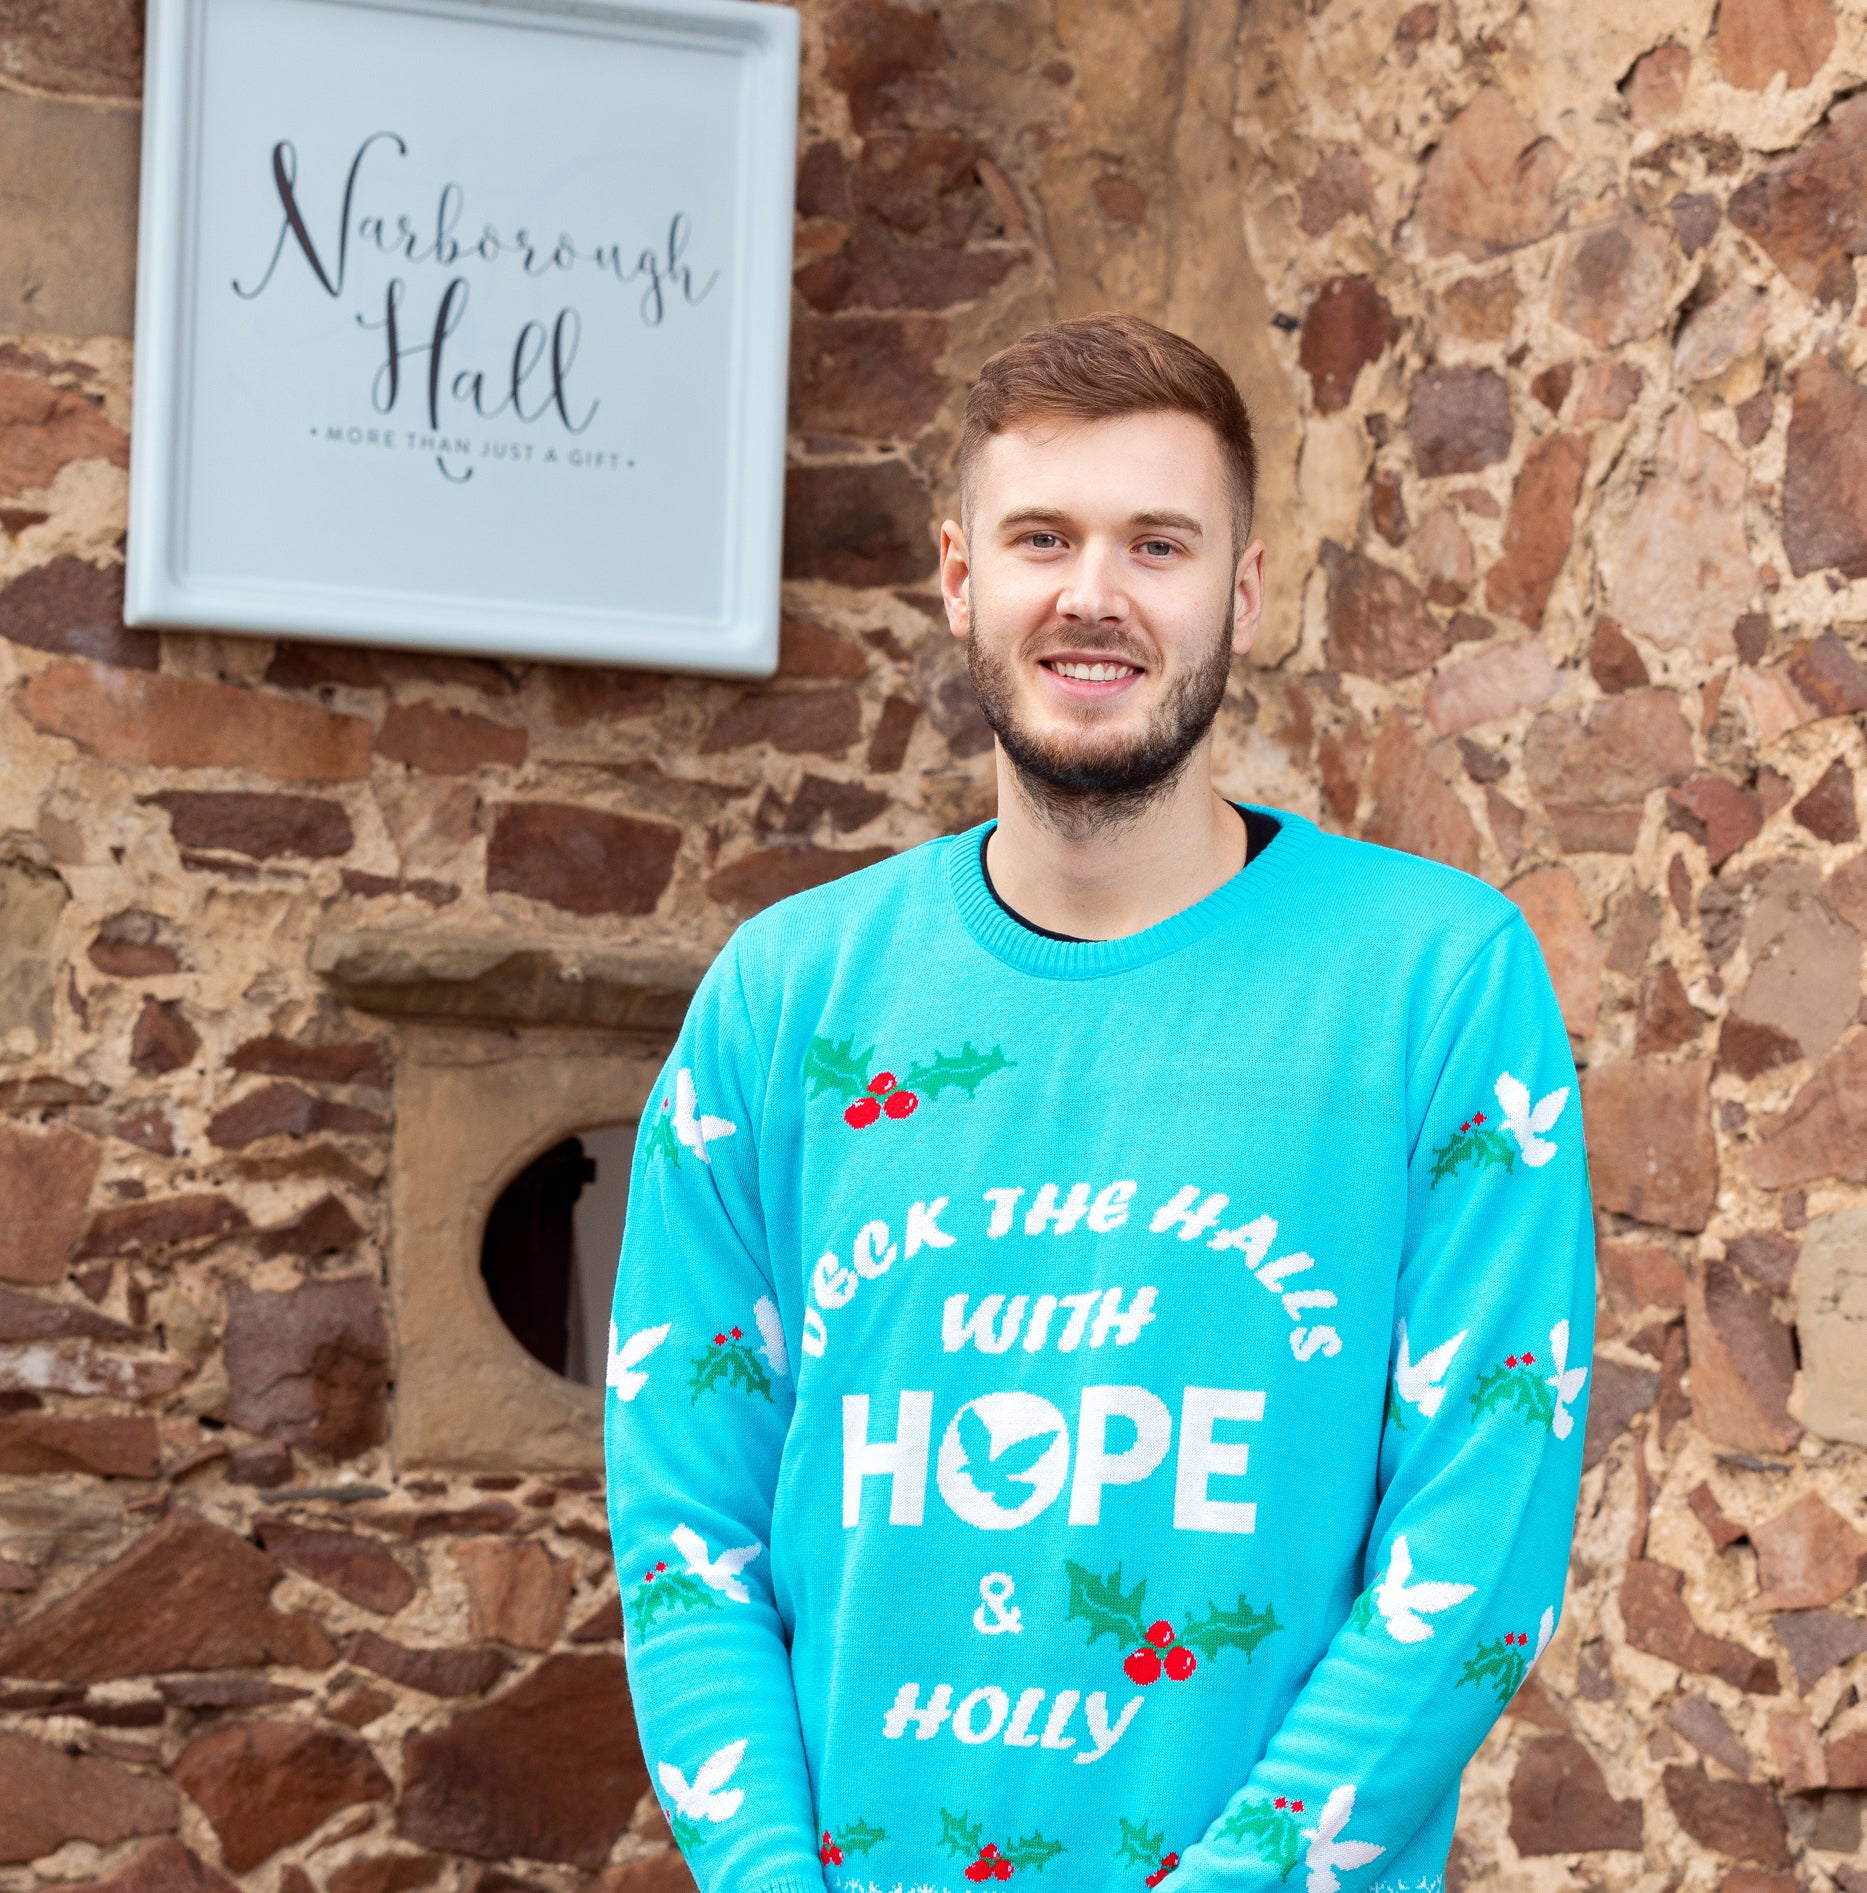 Get Your 'Hope Against Cancer' Charity Christmas Jumper